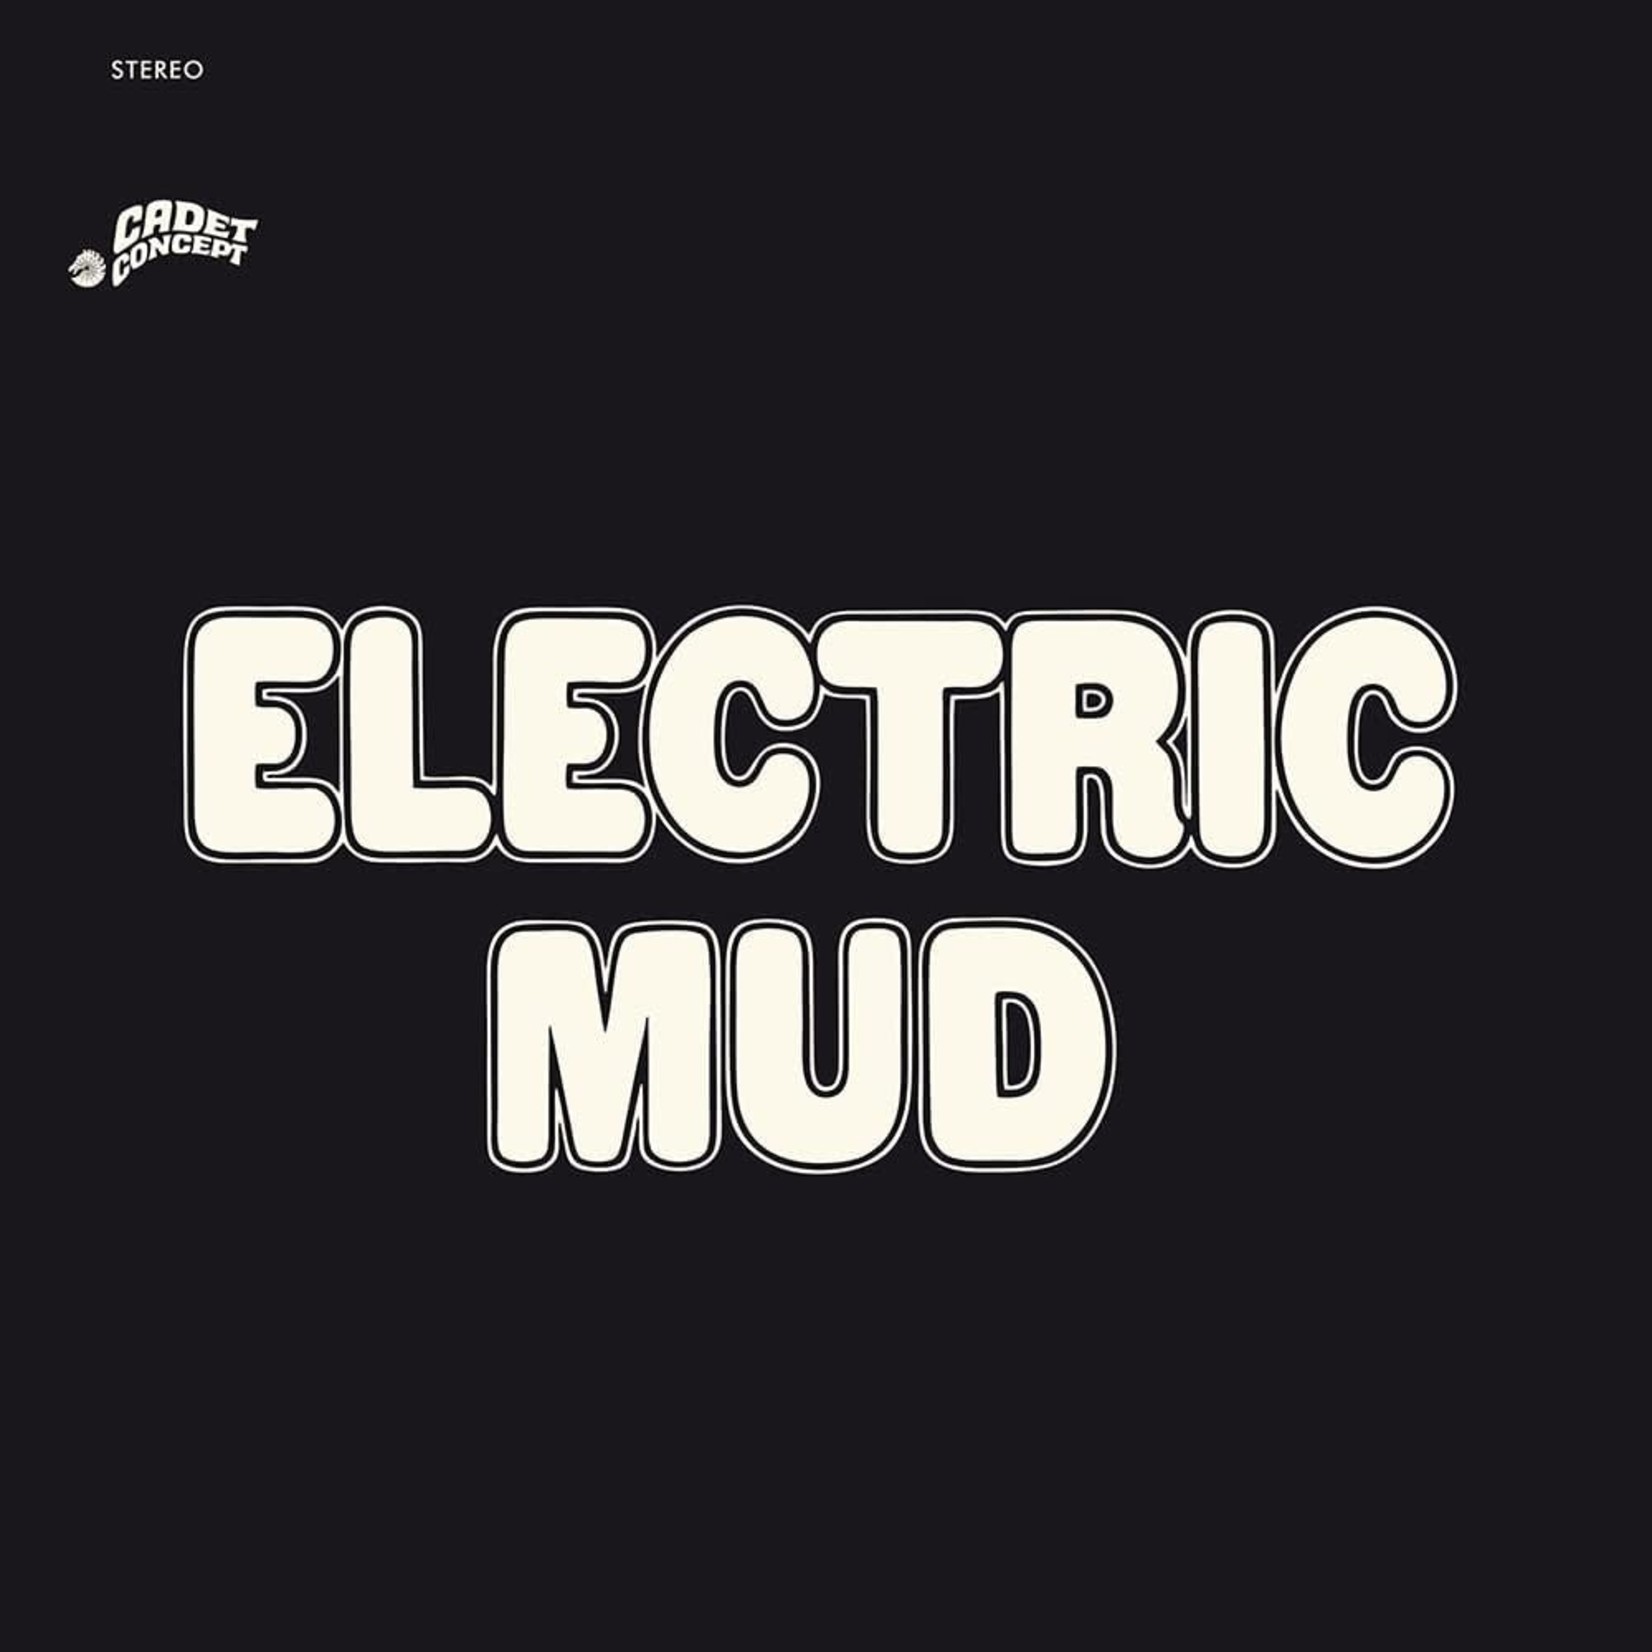 Vinyl Muddy Waters - Electric Mud (Limited White Vinyl Edition)